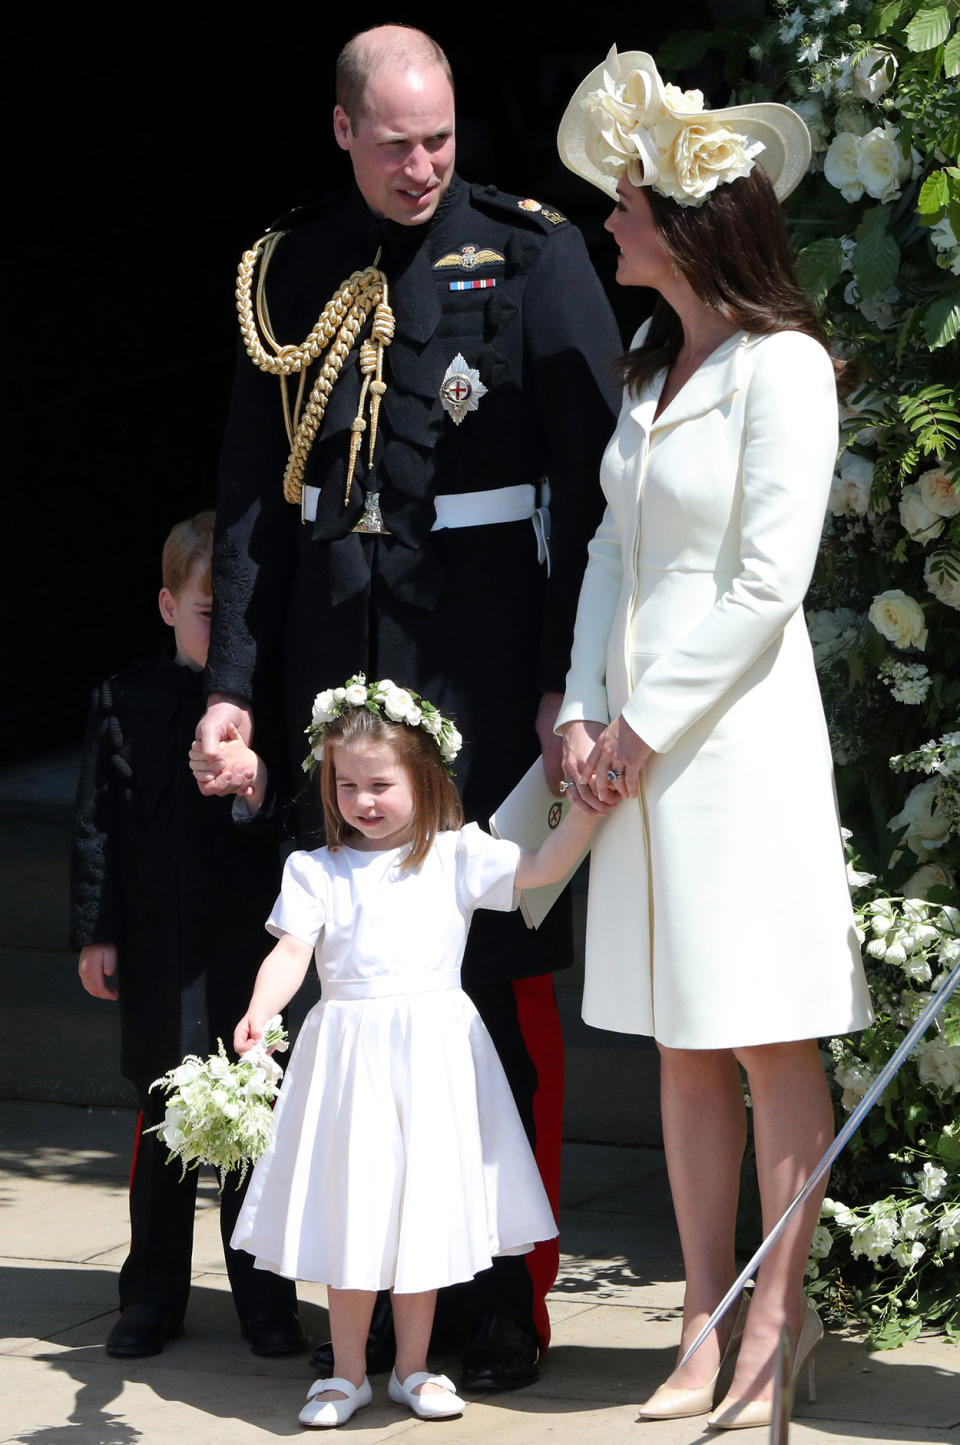 Prince William, Kate Middleton and Princess Charlotte at Meghan and Prince Harry's wedding